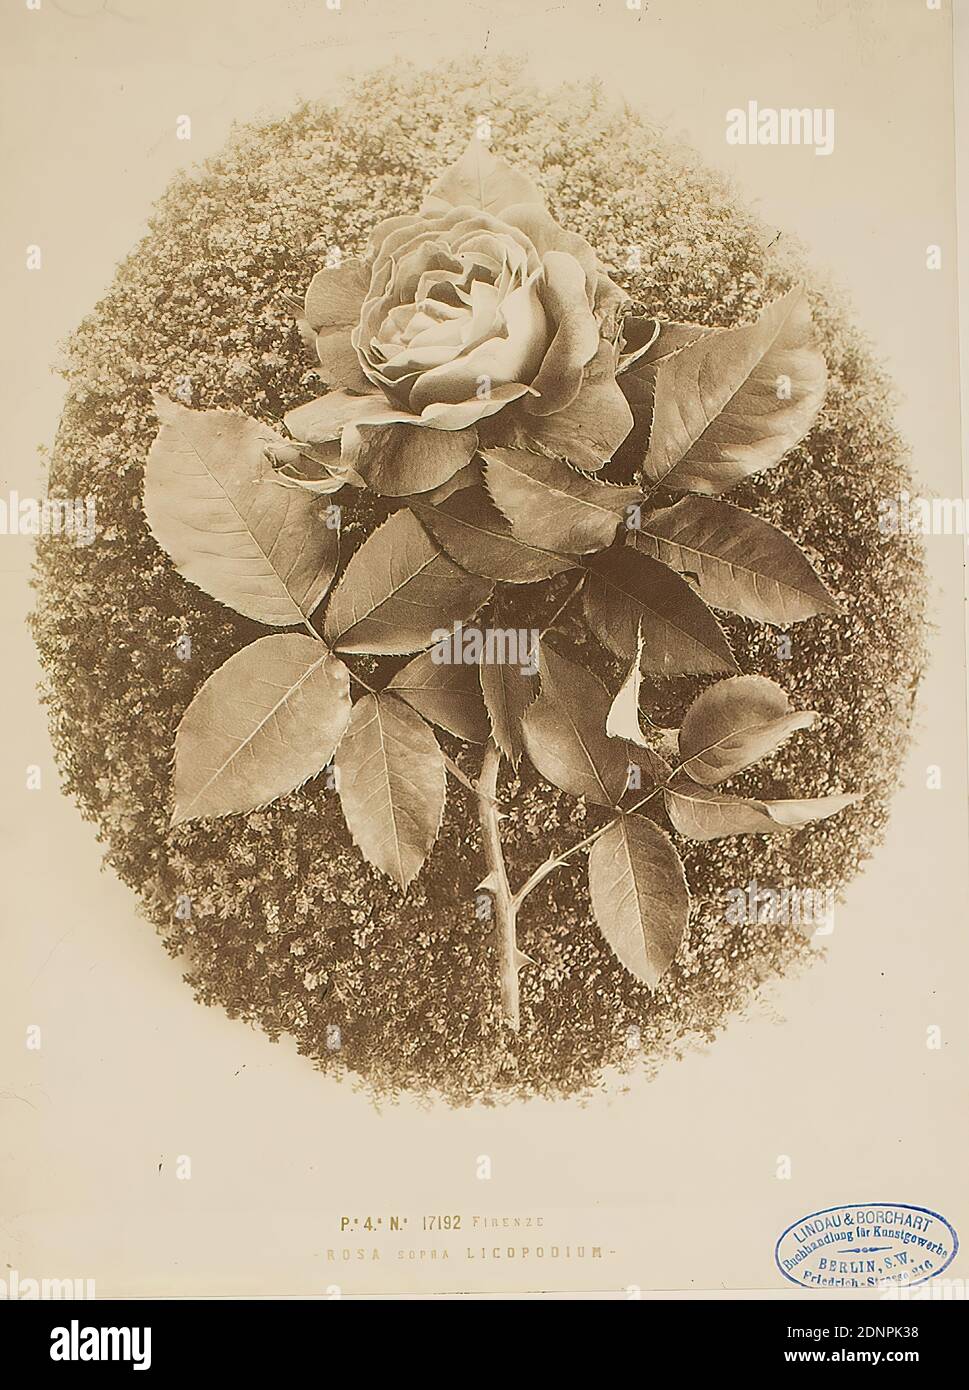 Firenze - Rosa sopra licopodium, albumin paper, black and white positive process, image size: height: 25.00 cm; width: 19.30 cm, titled: recto u. Middle: copied in block letters: FIRENZE - ROSA SOPRA LICOPODIUM, stamp: recto and right: in blue: Lindau & Borchart - Buchhandlung für Kunstgewerbe, Berlin S.W, Friedrich-Strasse 216, stamp: verso and center: photography, nature photography, rose, plants, vegetation Stock Photo